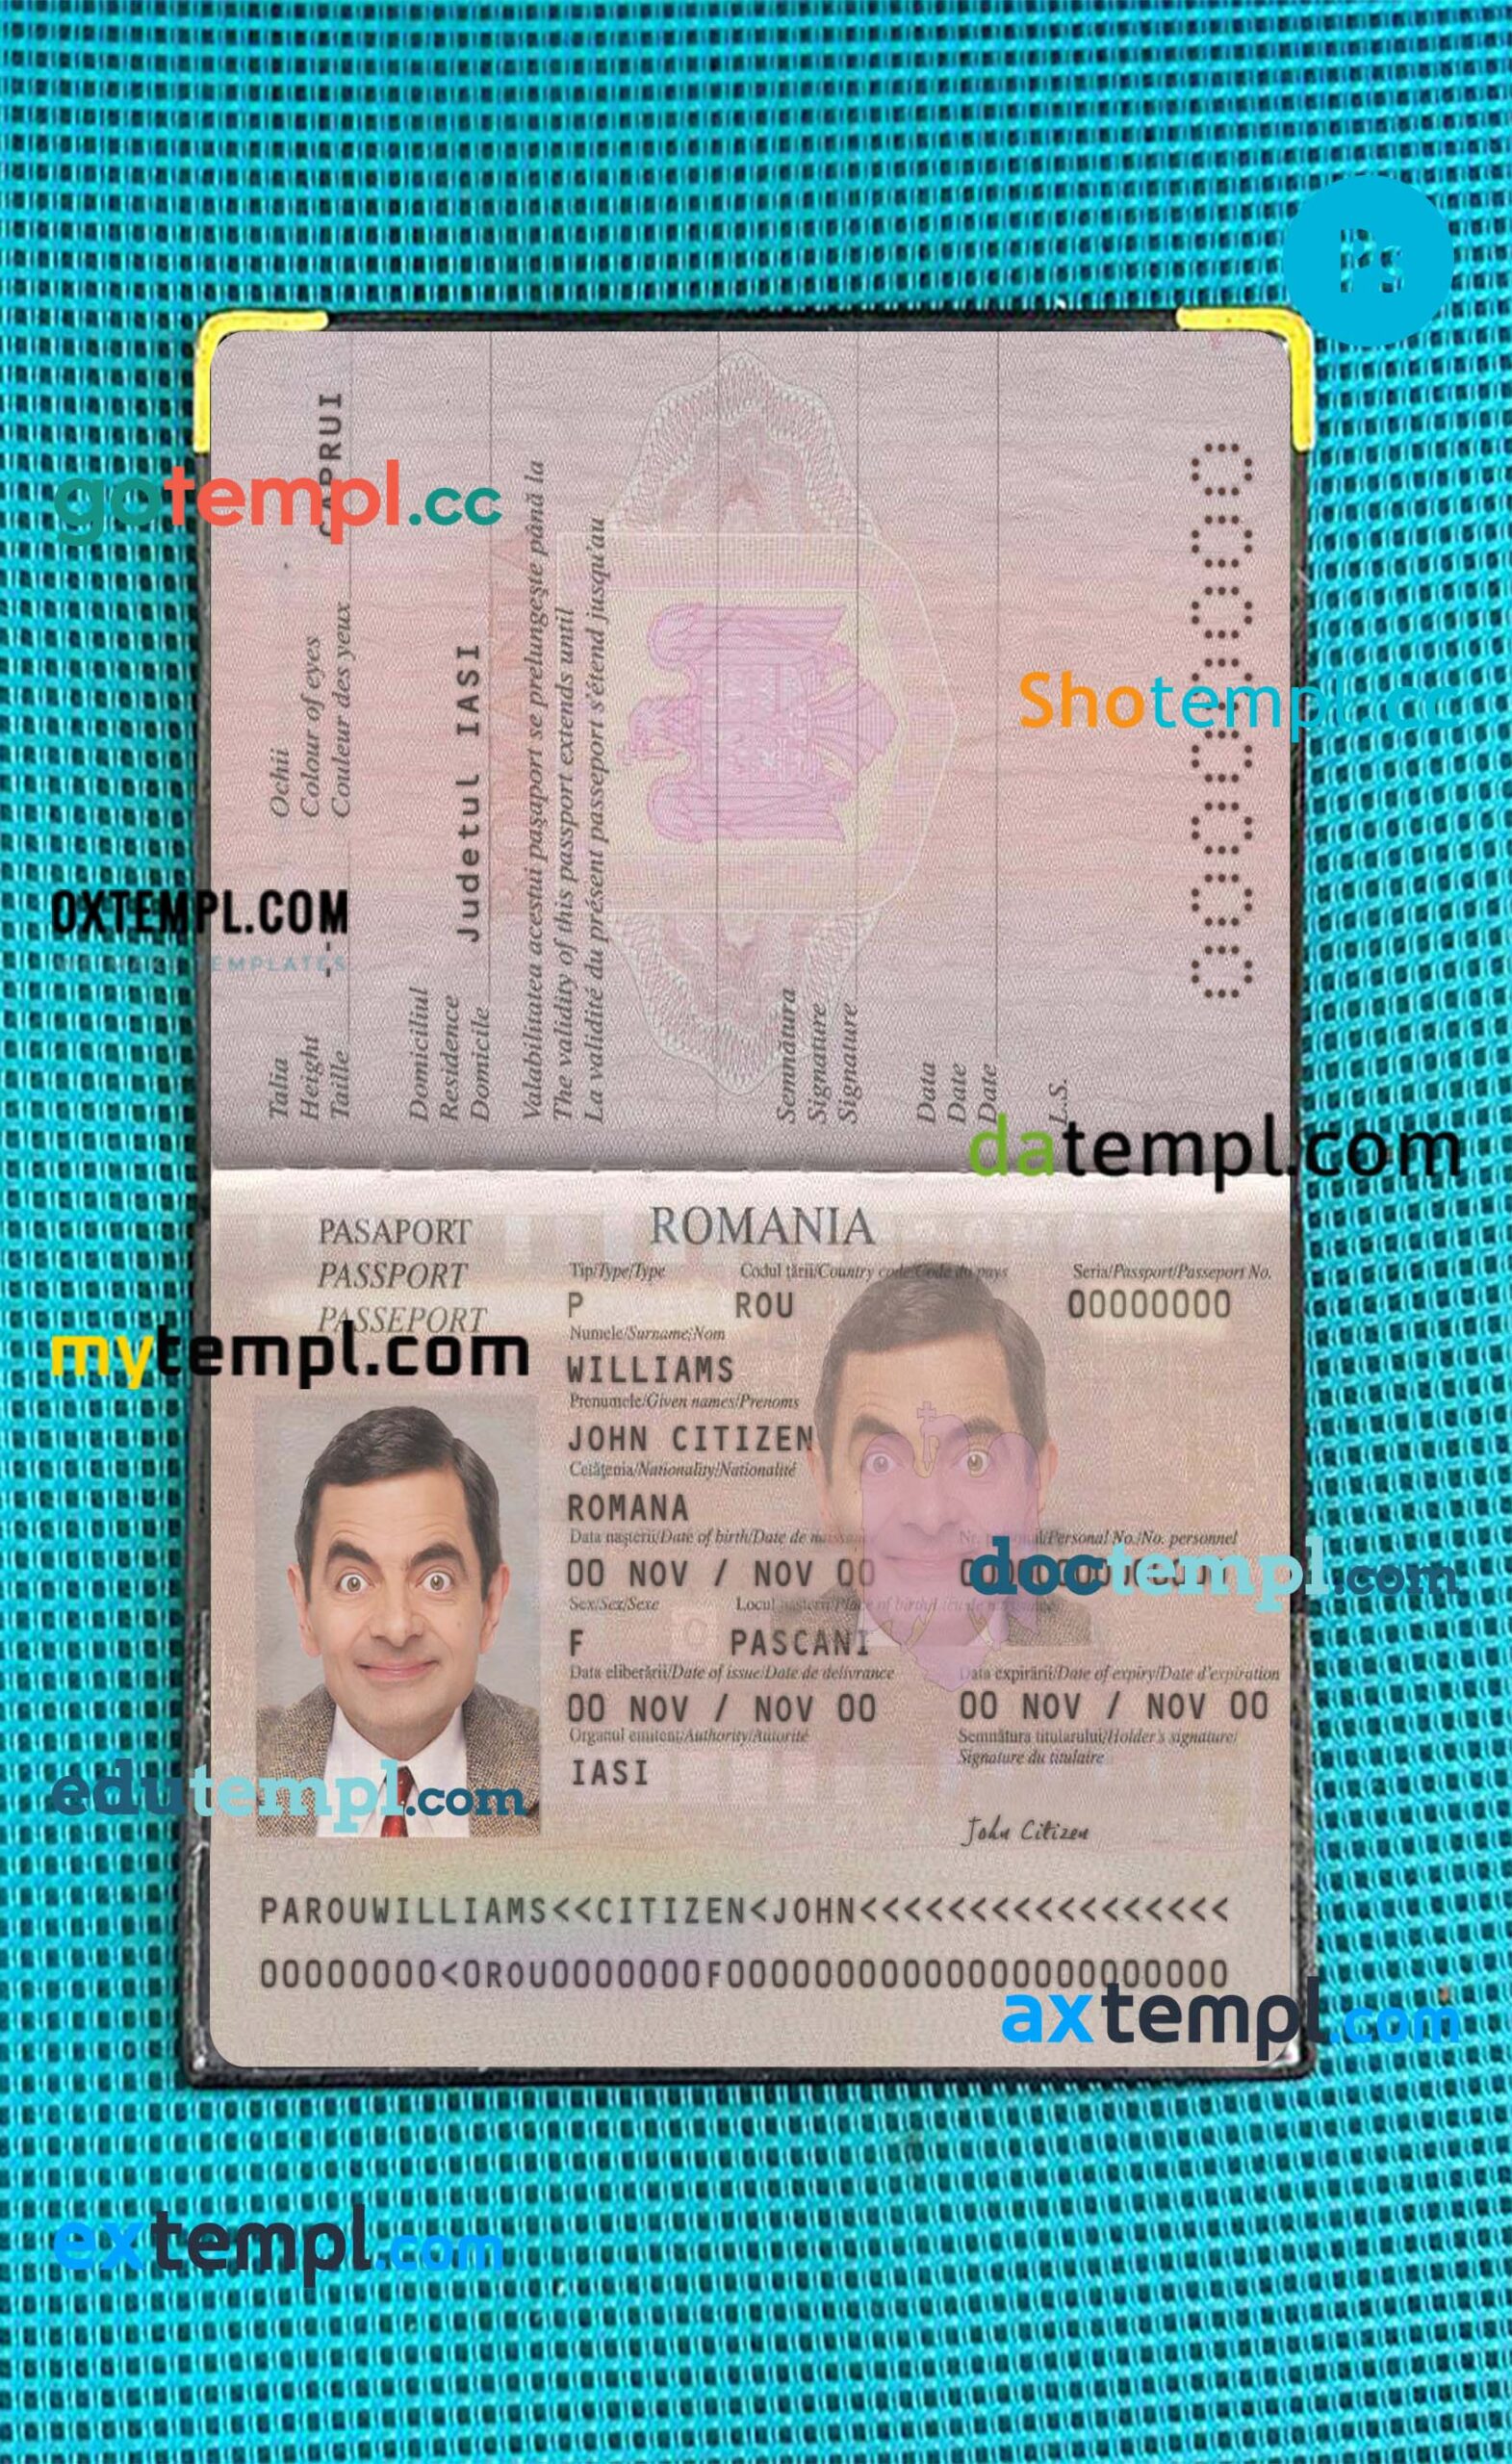 Romania passport editable PSD files, scan and photo taken image (2013-present ),2 in 1